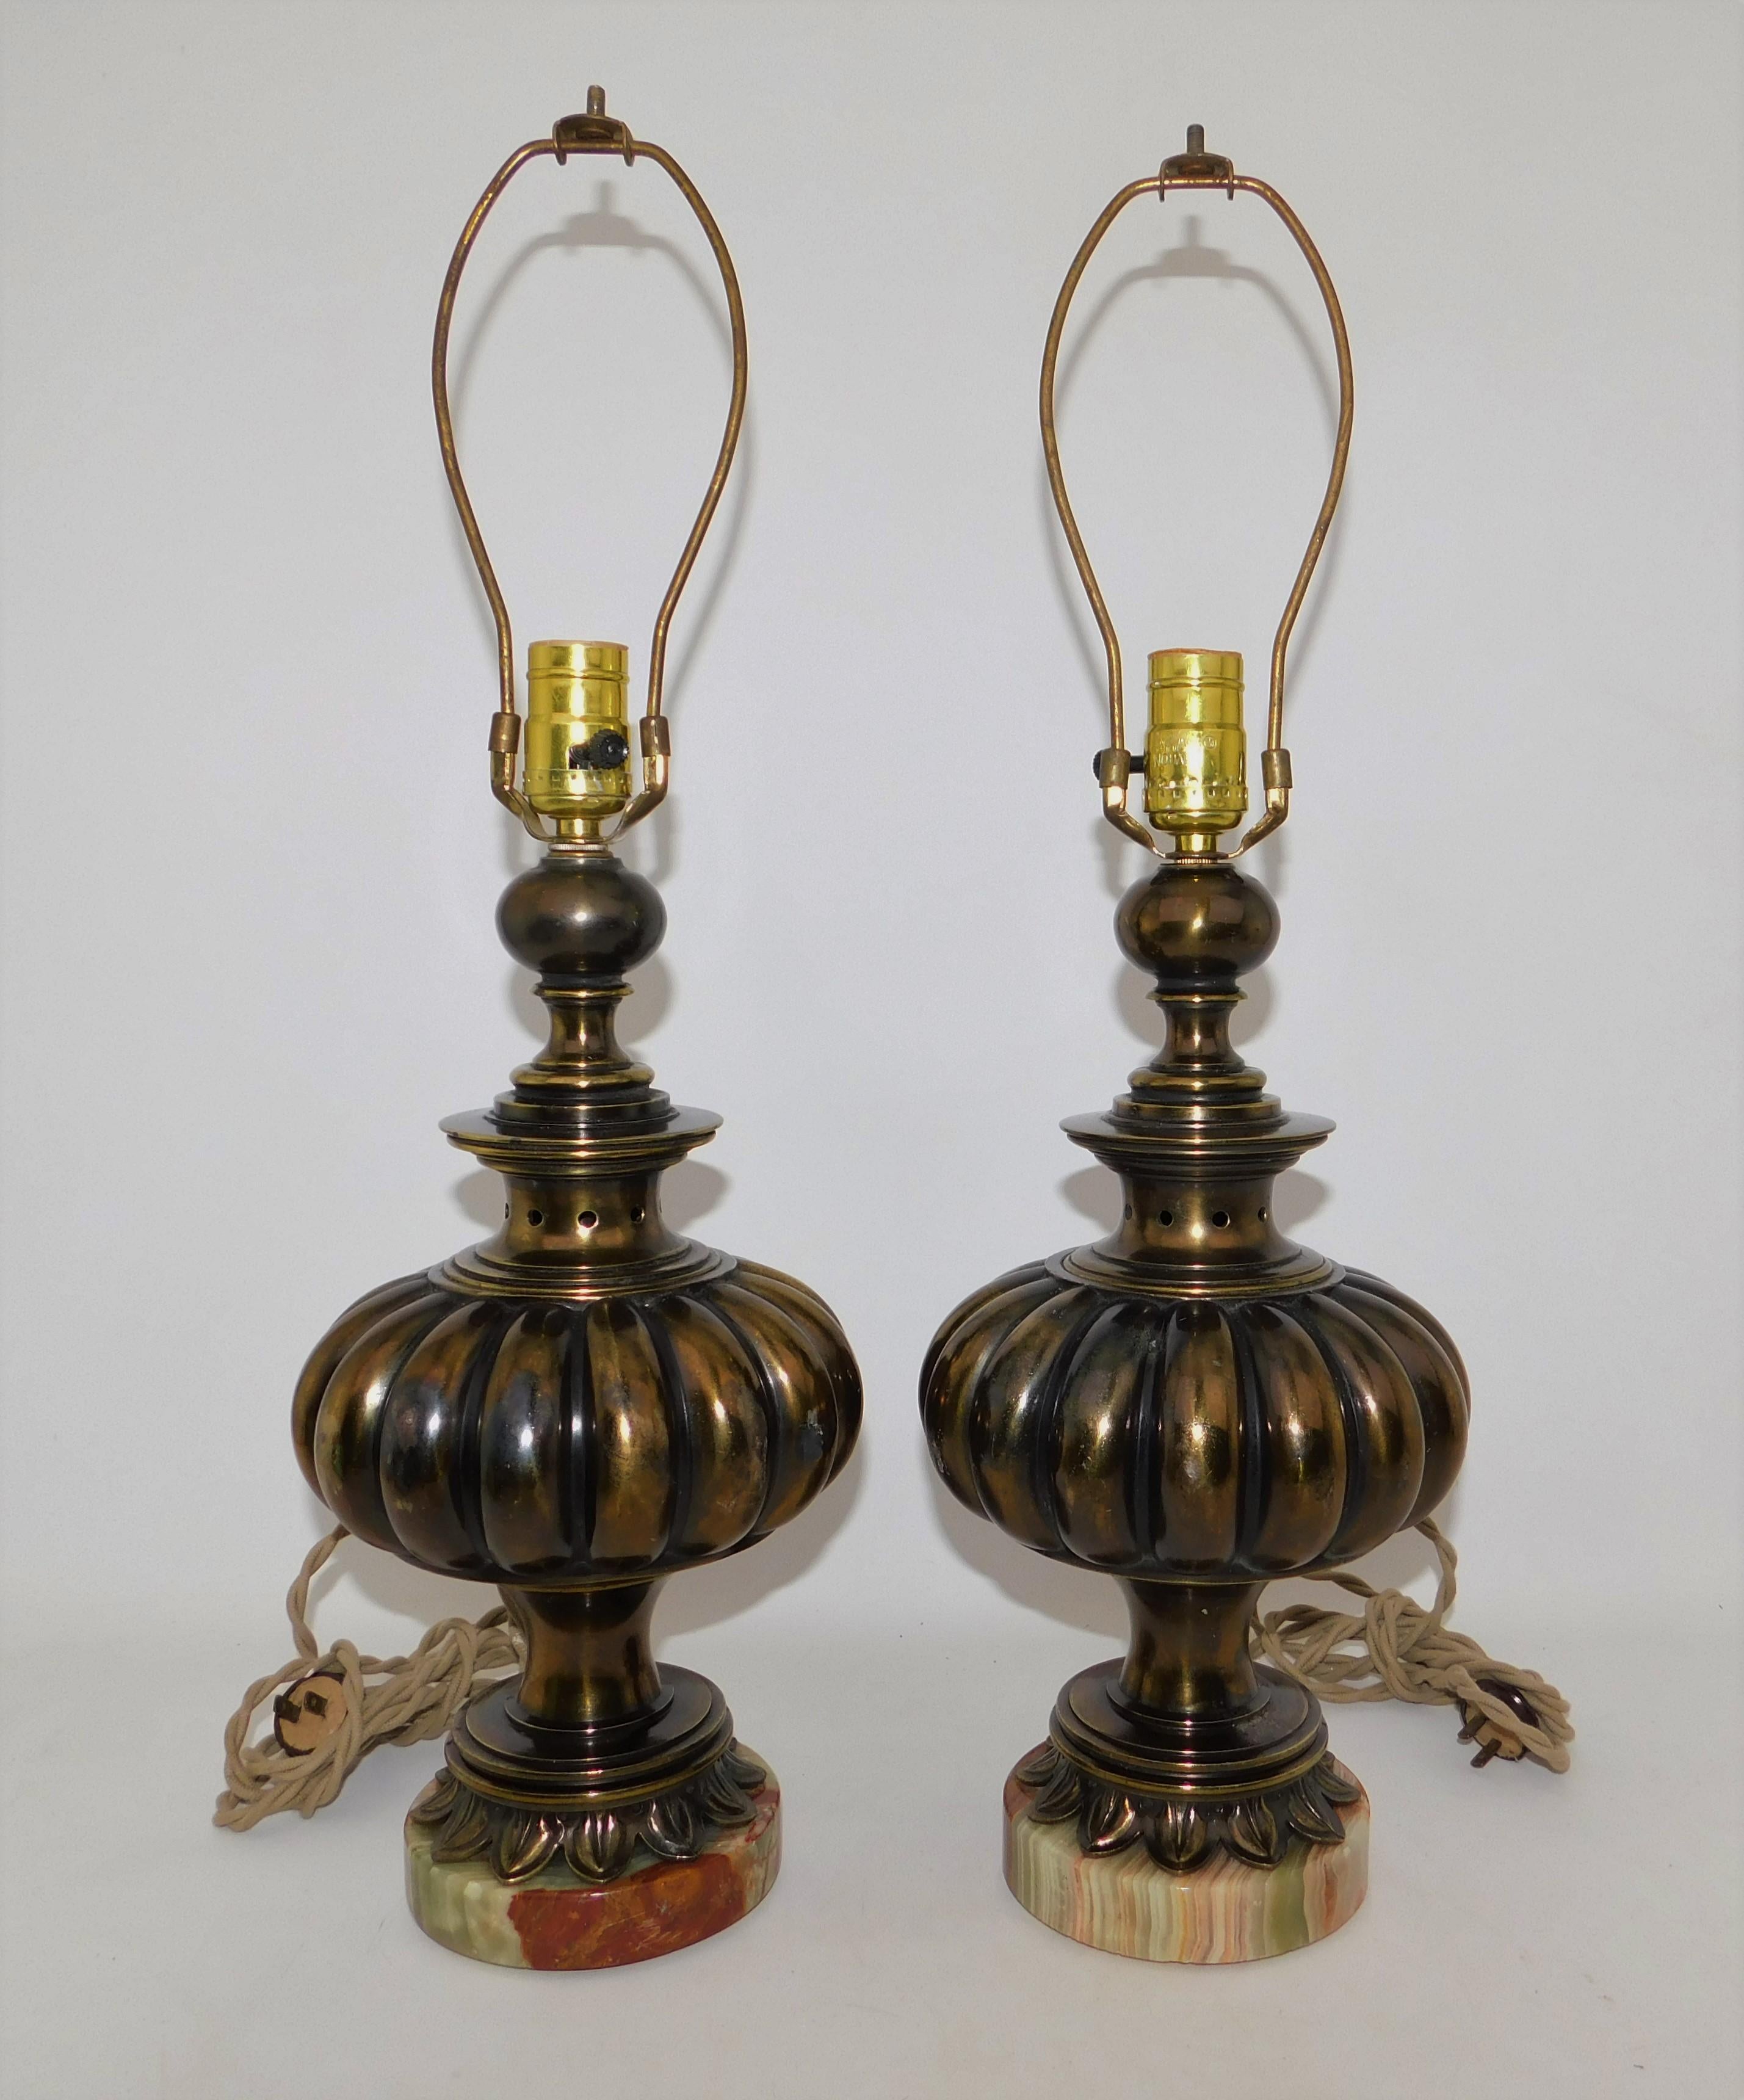 Pair of Hollywood Regency Brushed Bronze Table Lamps with Marble Bases In Good Condition For Sale In Hamilton, Ontario